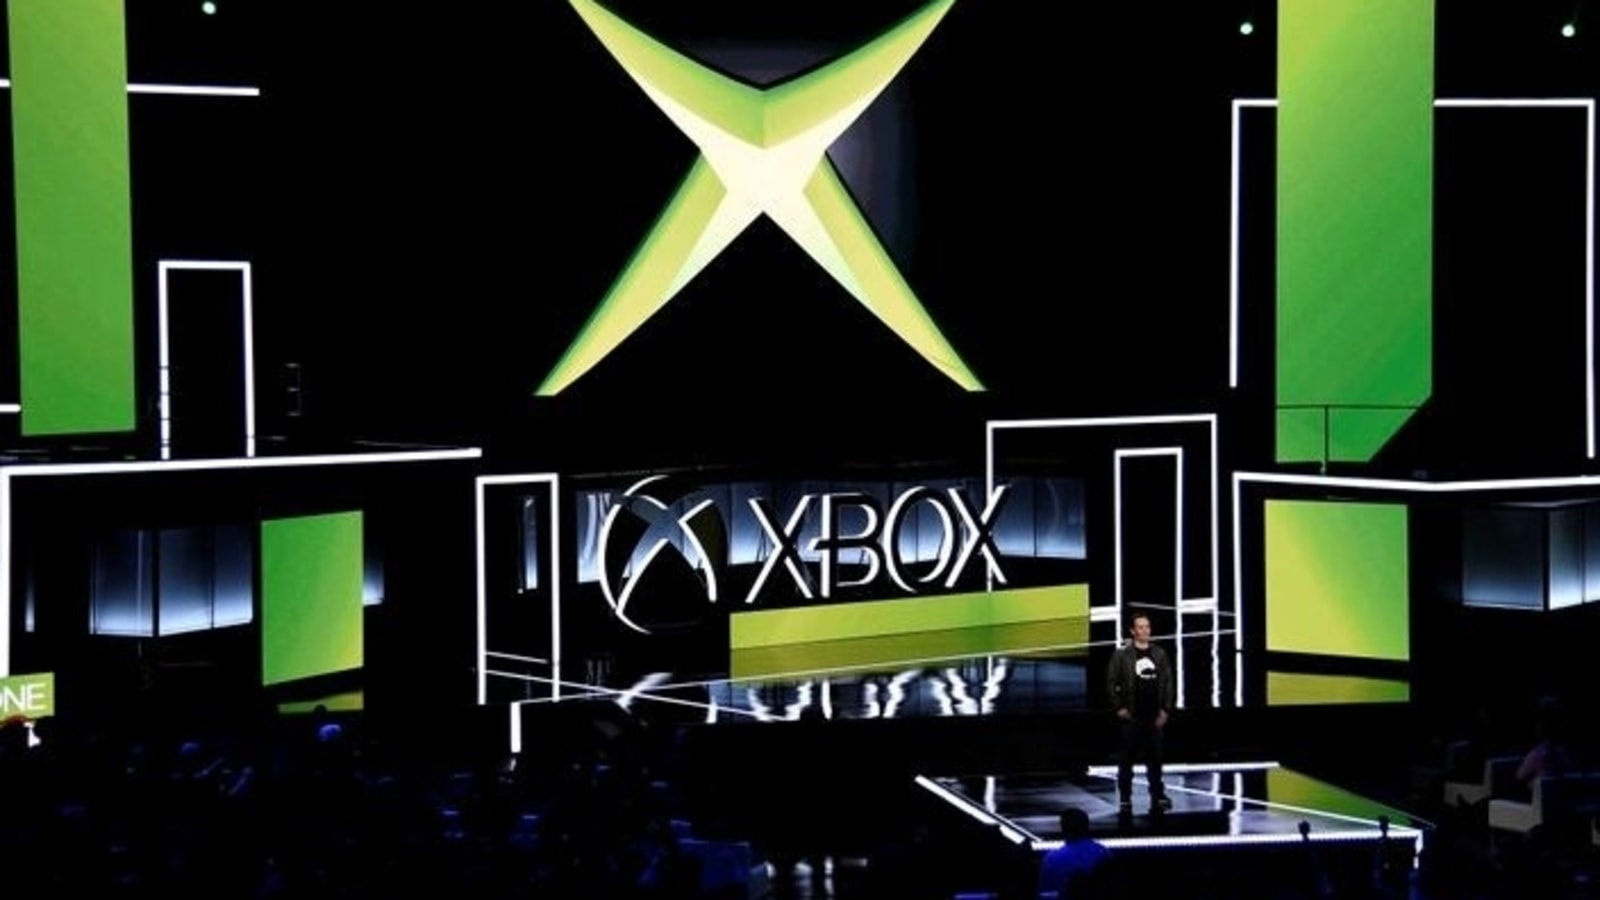 Xbox Game Pass streaming stick and TV app could be here soon